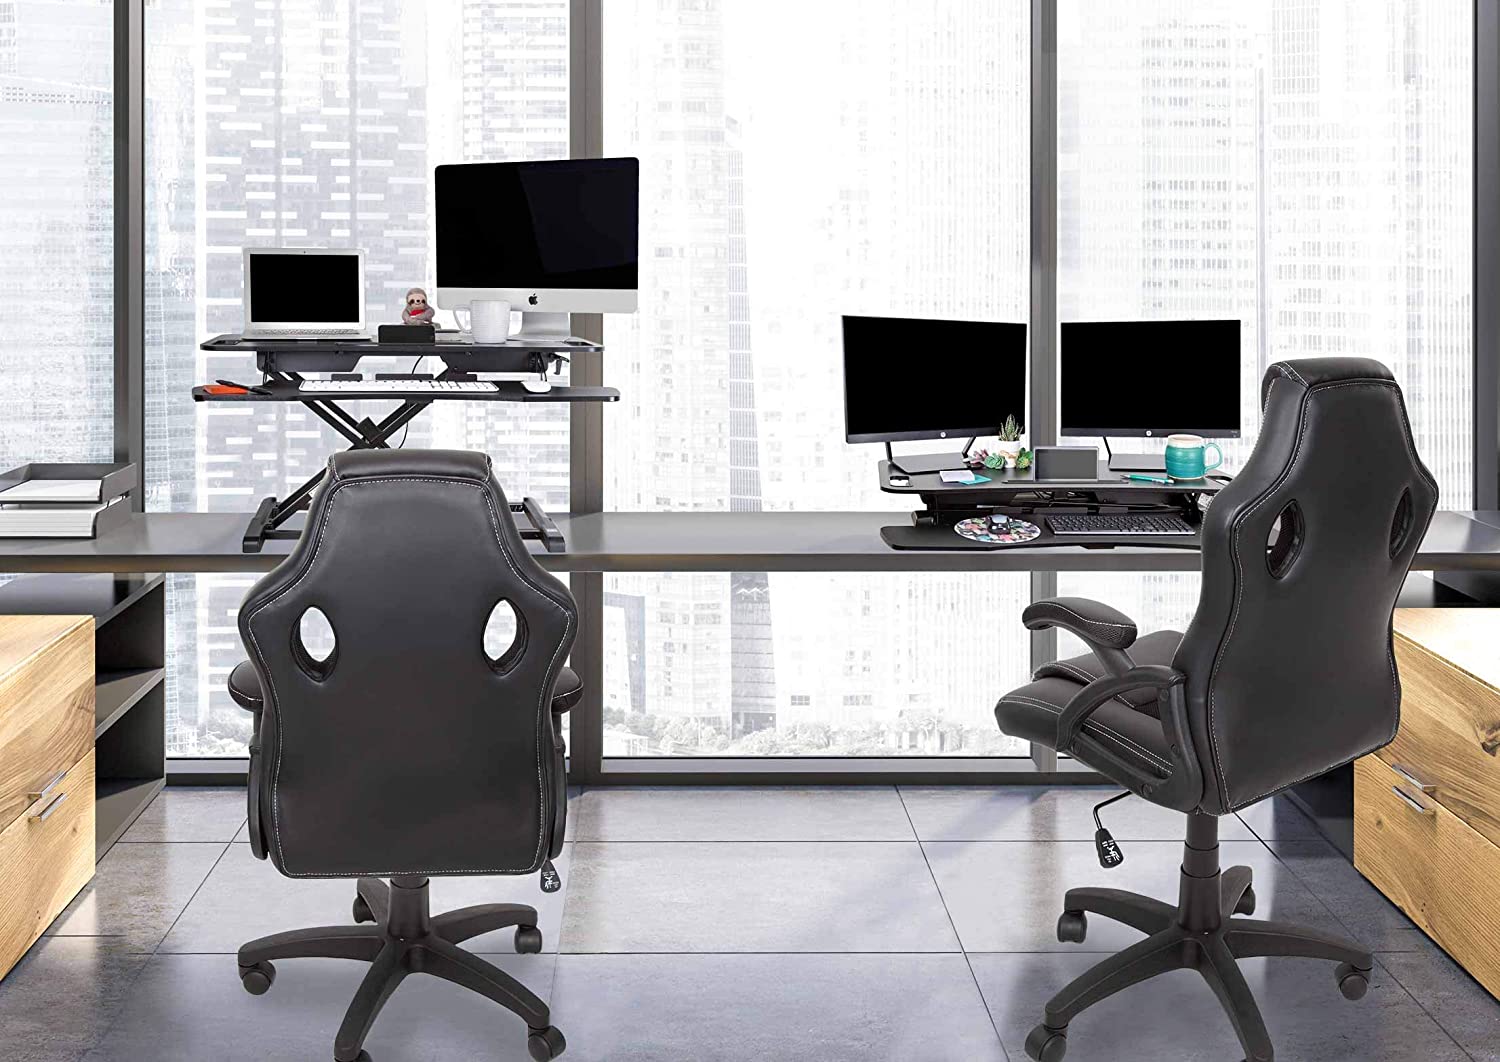 Ergonomic Office Chair | Rolling Desk Chair by Stand Steady